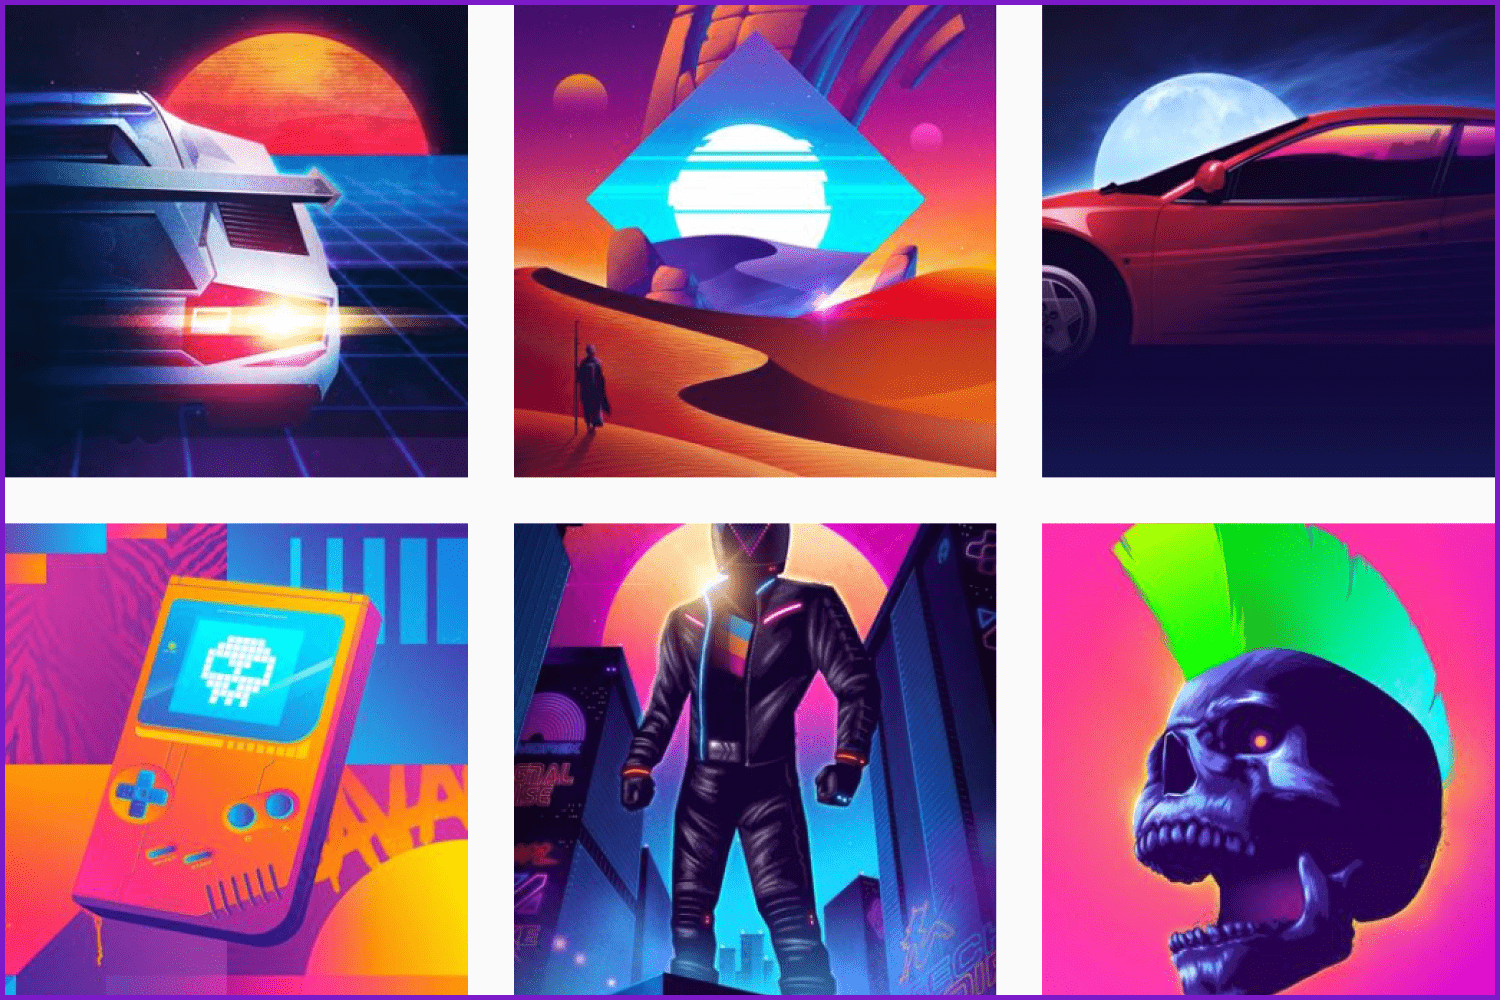 Collage of Instagram account images @signalnoise.